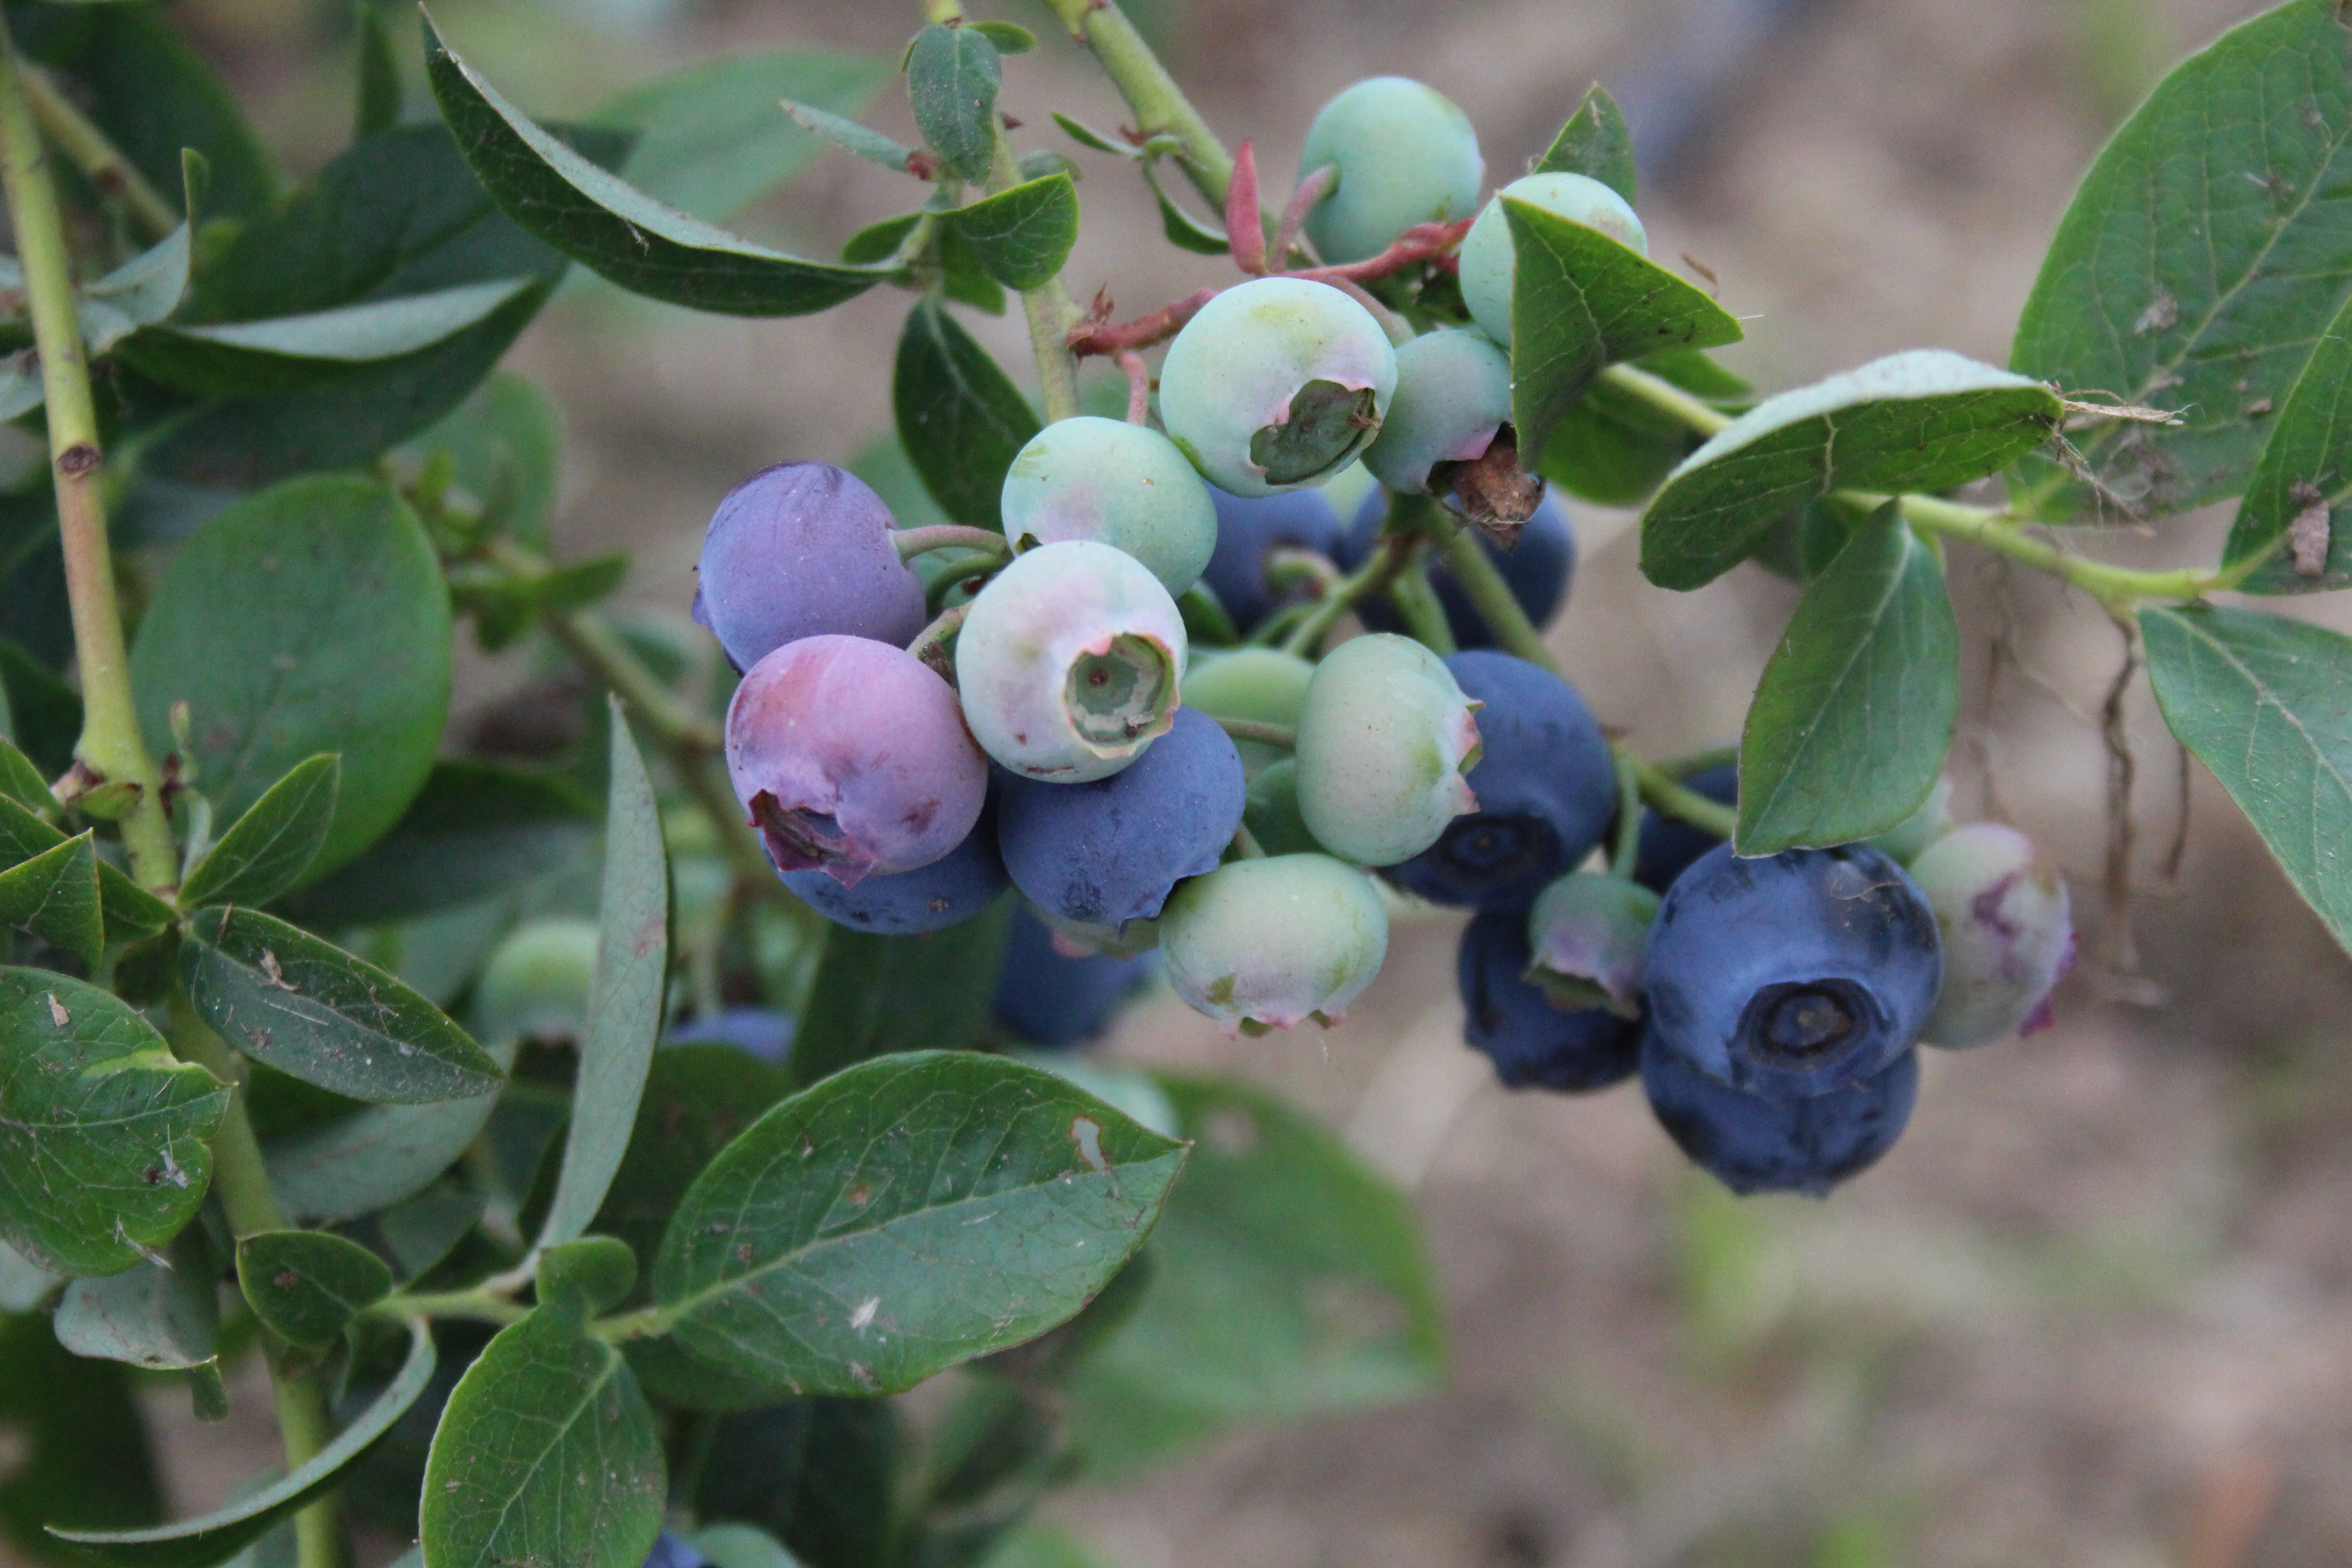 blueberries growing on a plant surrounded by leaves